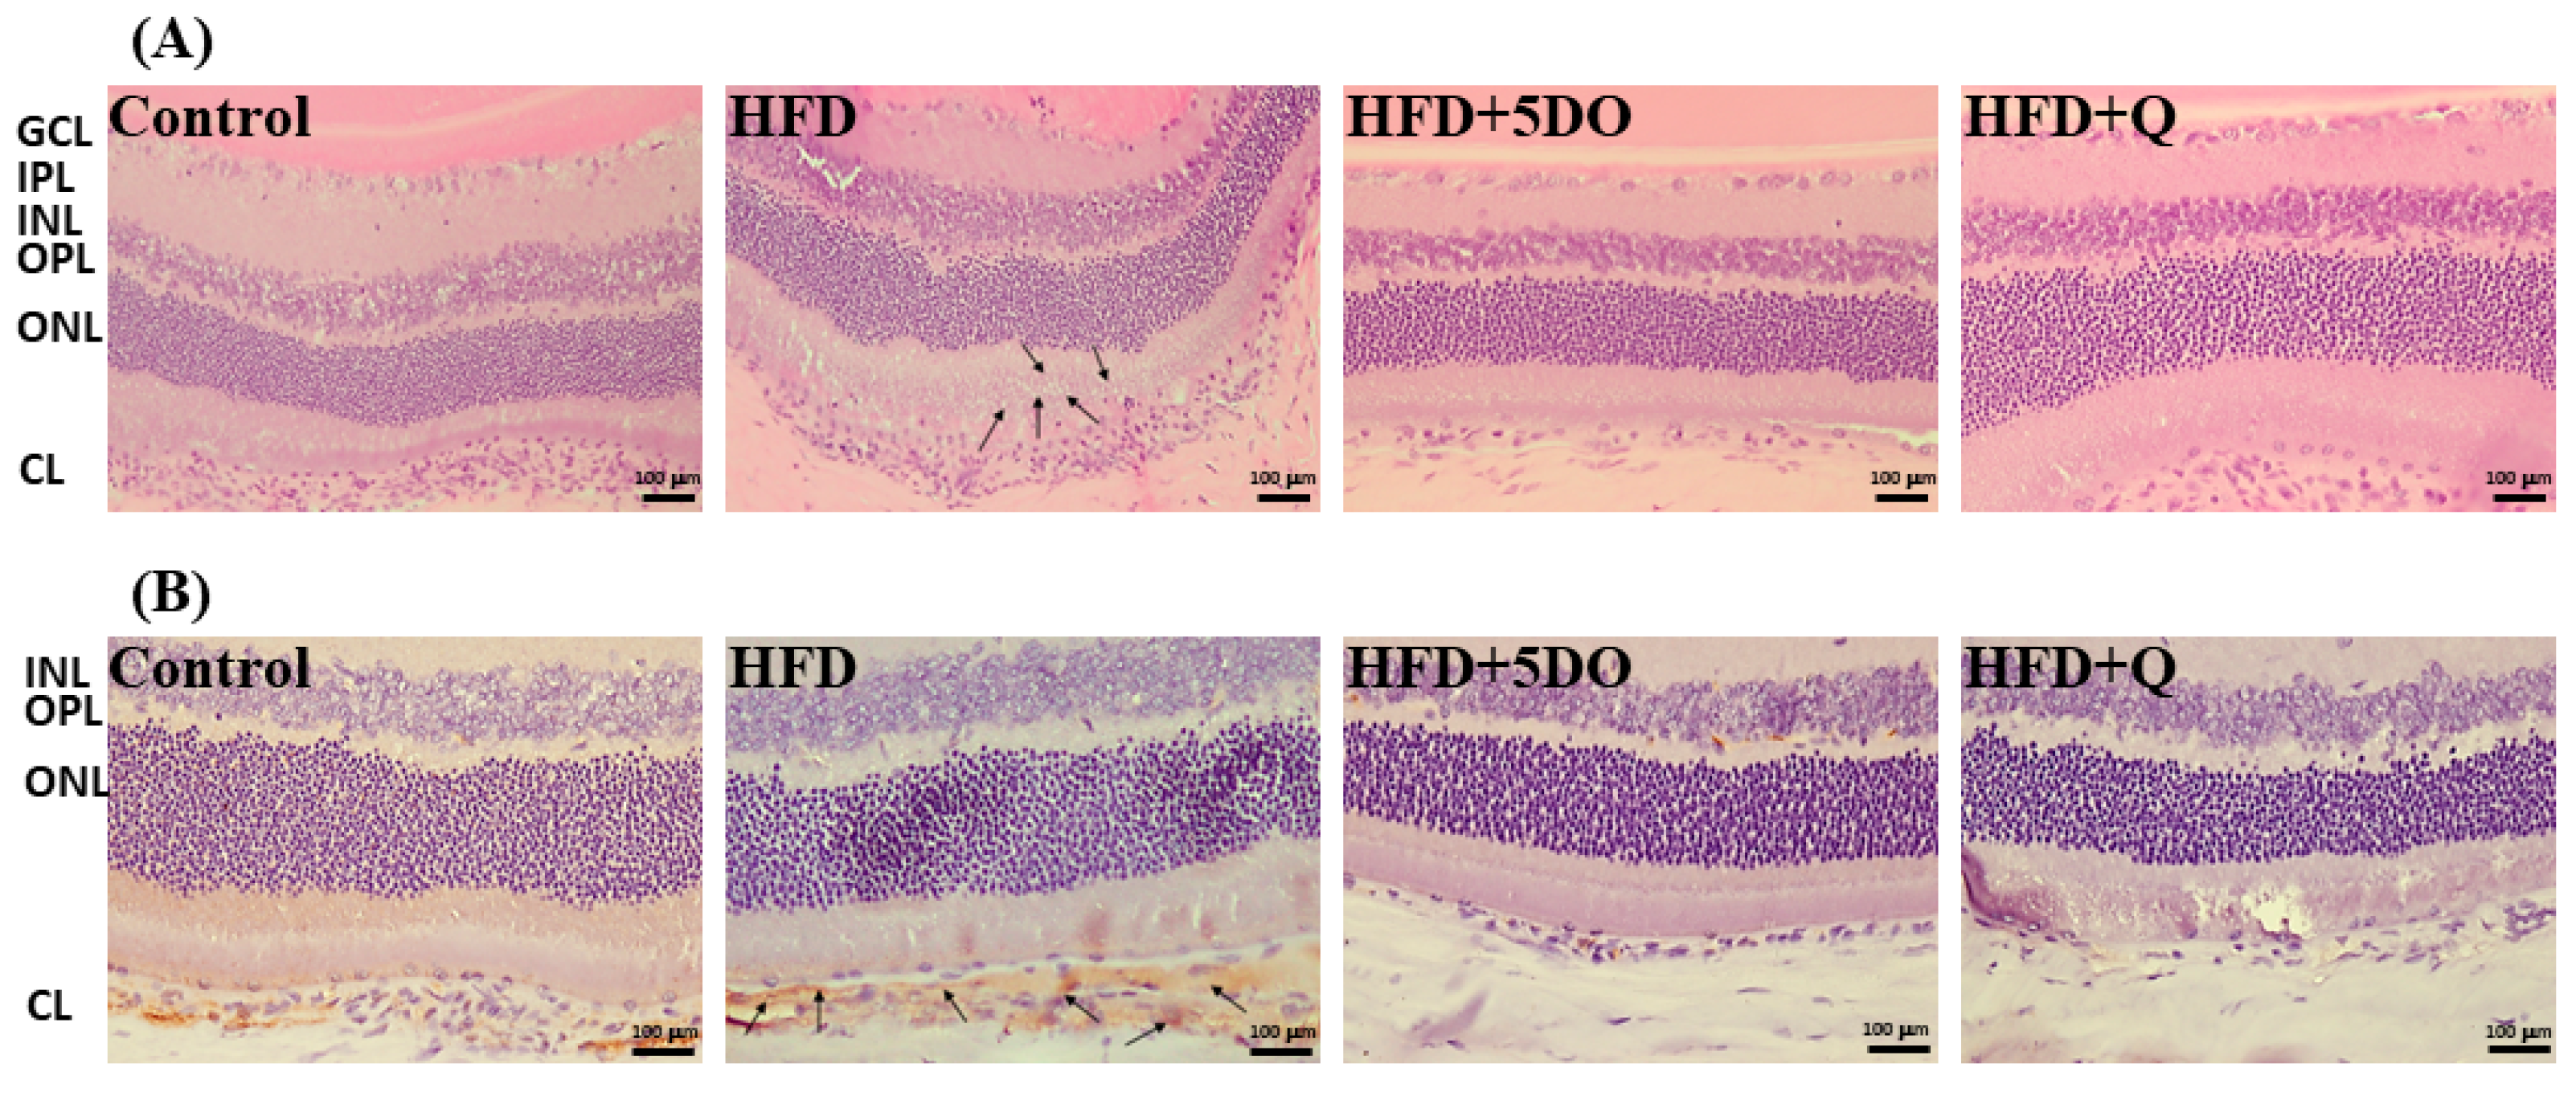 IJMS | Free Full-Text | Effects of Dried Onion Powder and Quercetin on  Obesity-Associated Hepatic Menifestation and Retinopathy